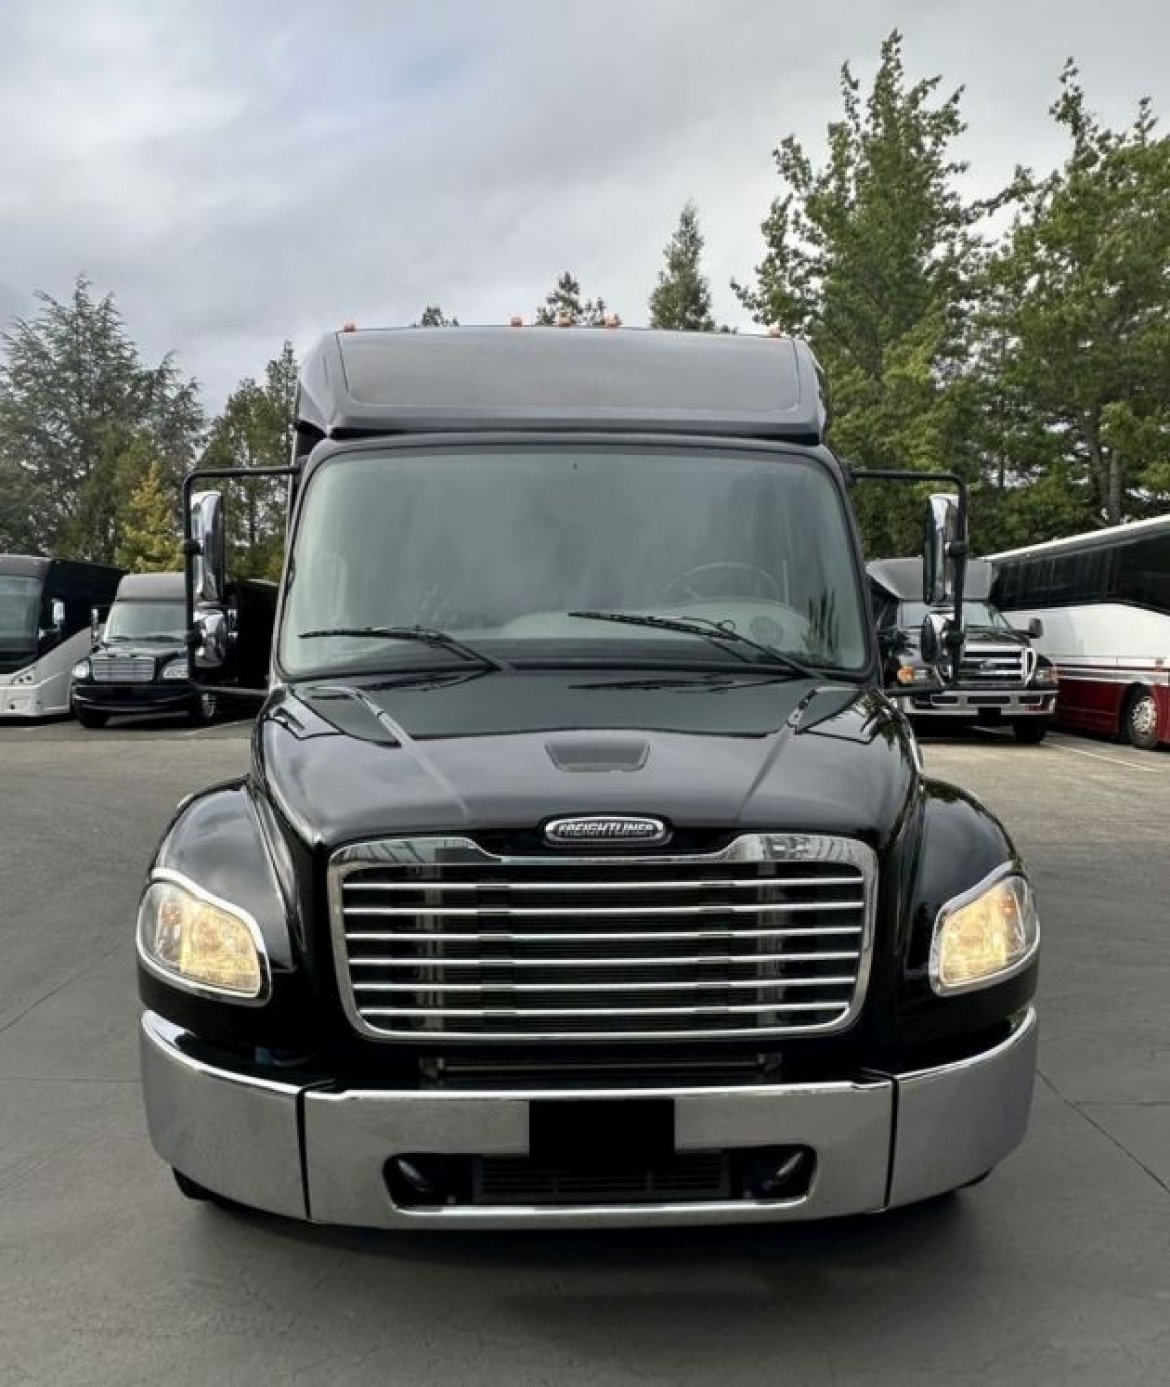 Executive Shuttle for sale: 2014 Freightliner M2 35-Passenger Executive Shuttle by Grech